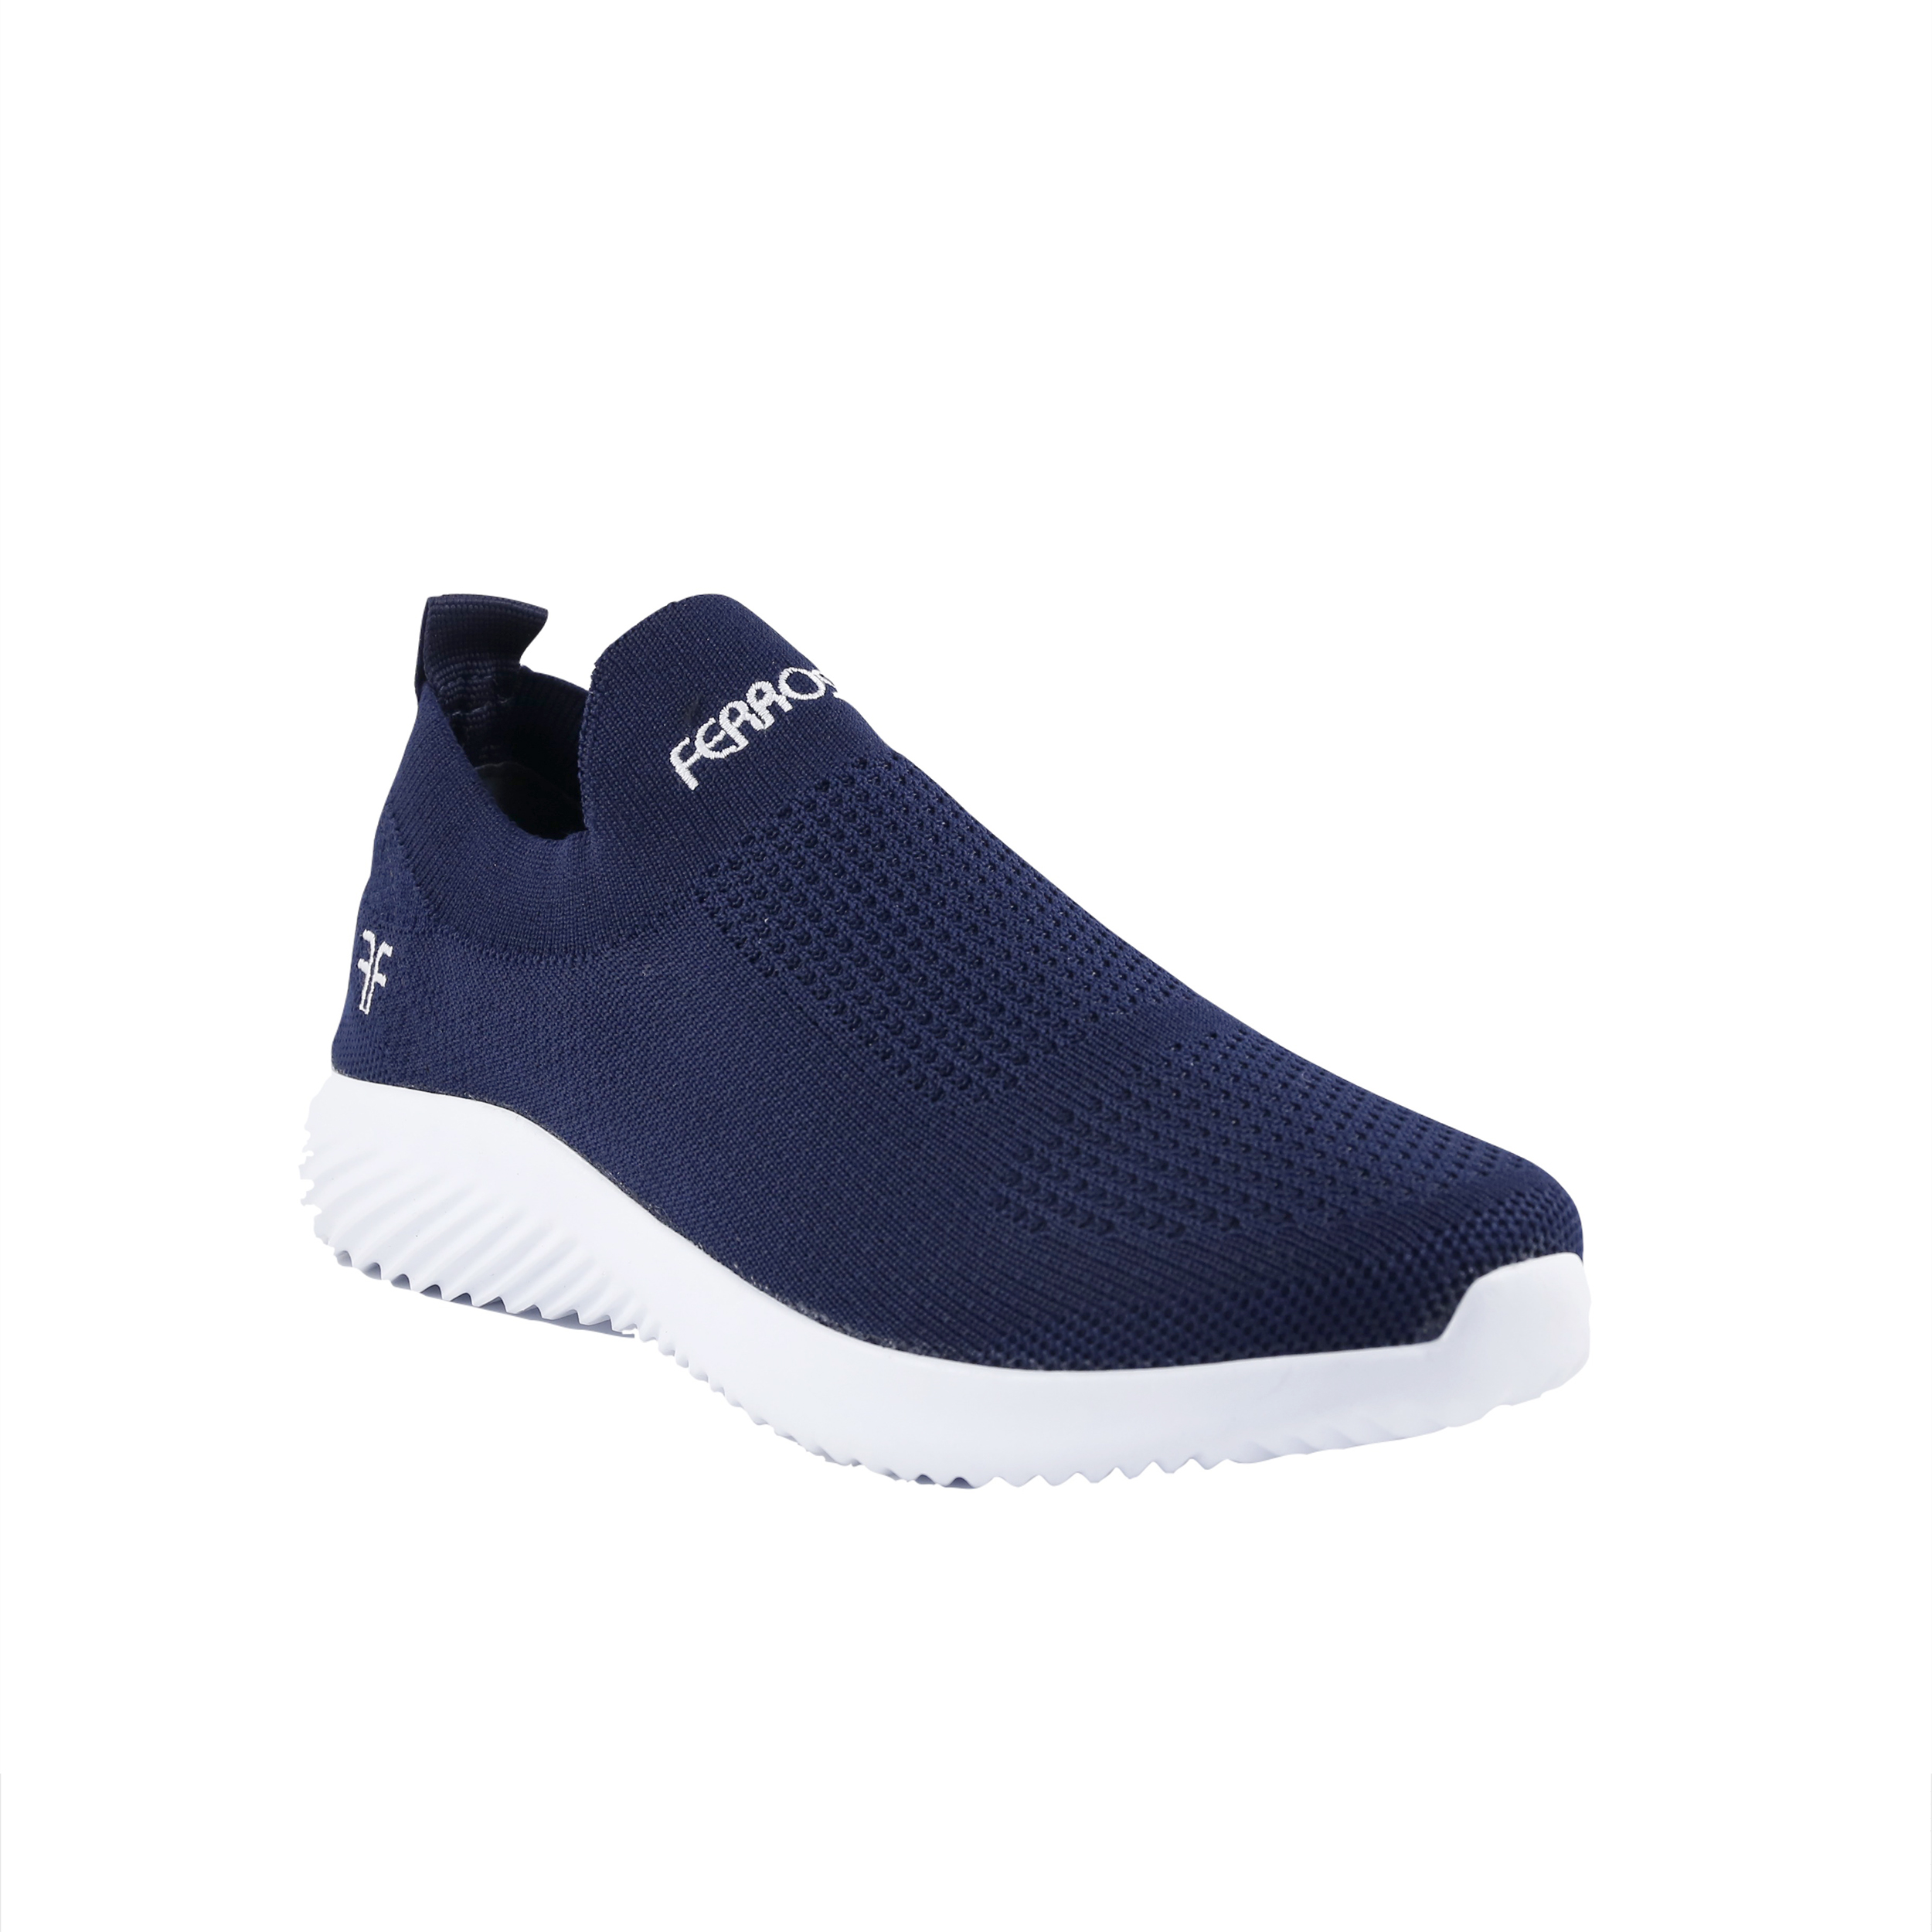 Man Shoes Casual-Sneakers Casual sneaker light